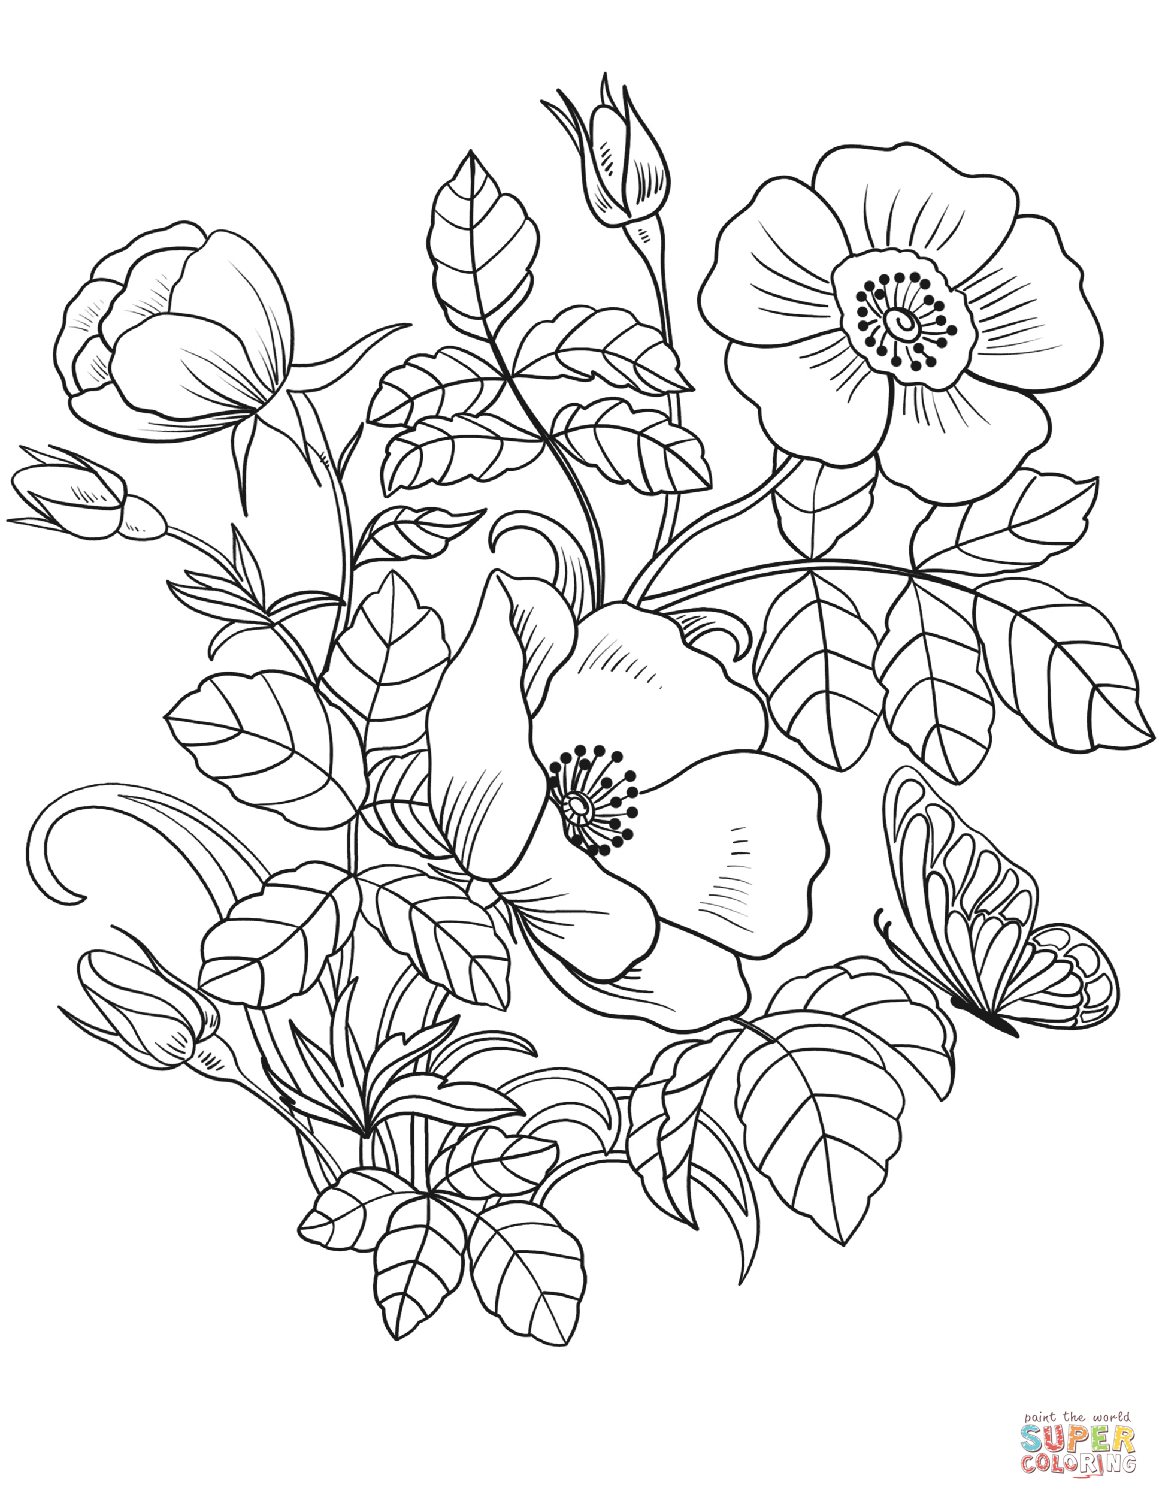 Spring flowers coloring page free printable coloring pages